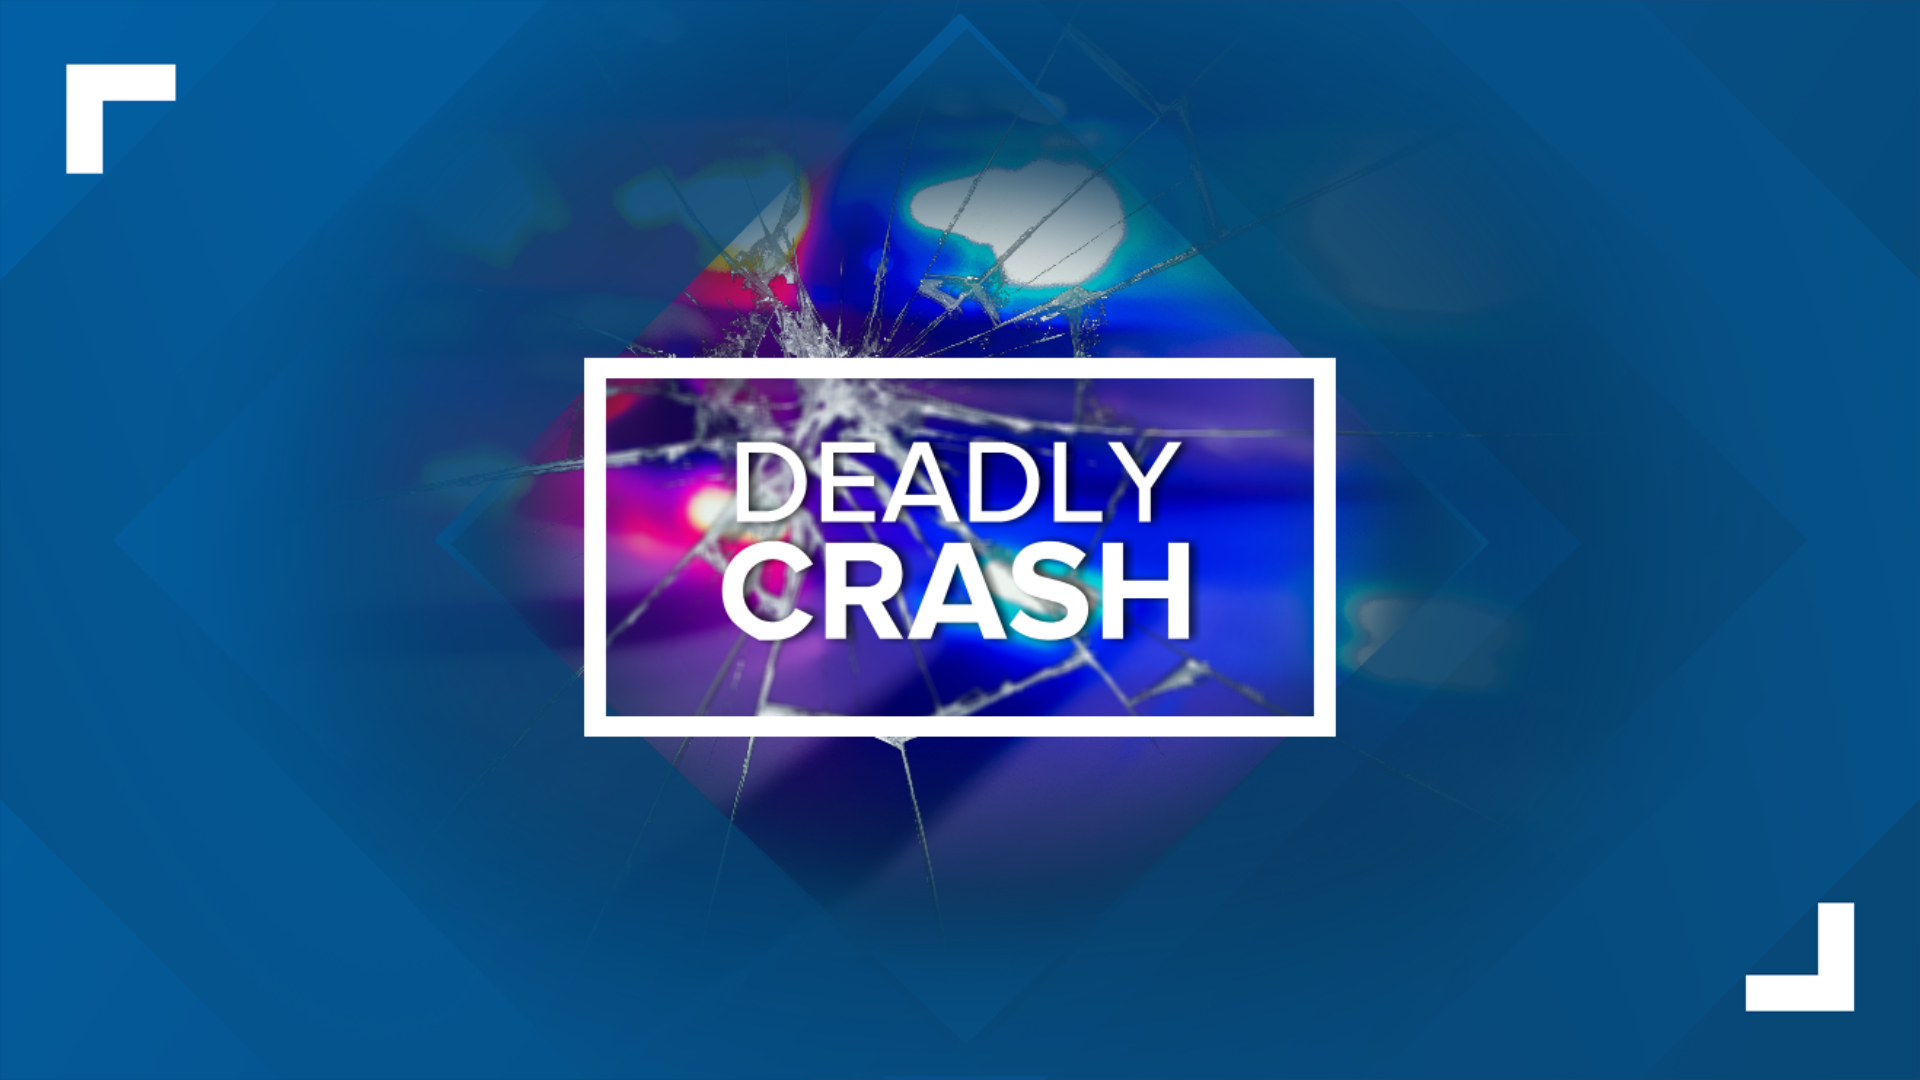 A man involved in a crash last month in Luzerne County has died.